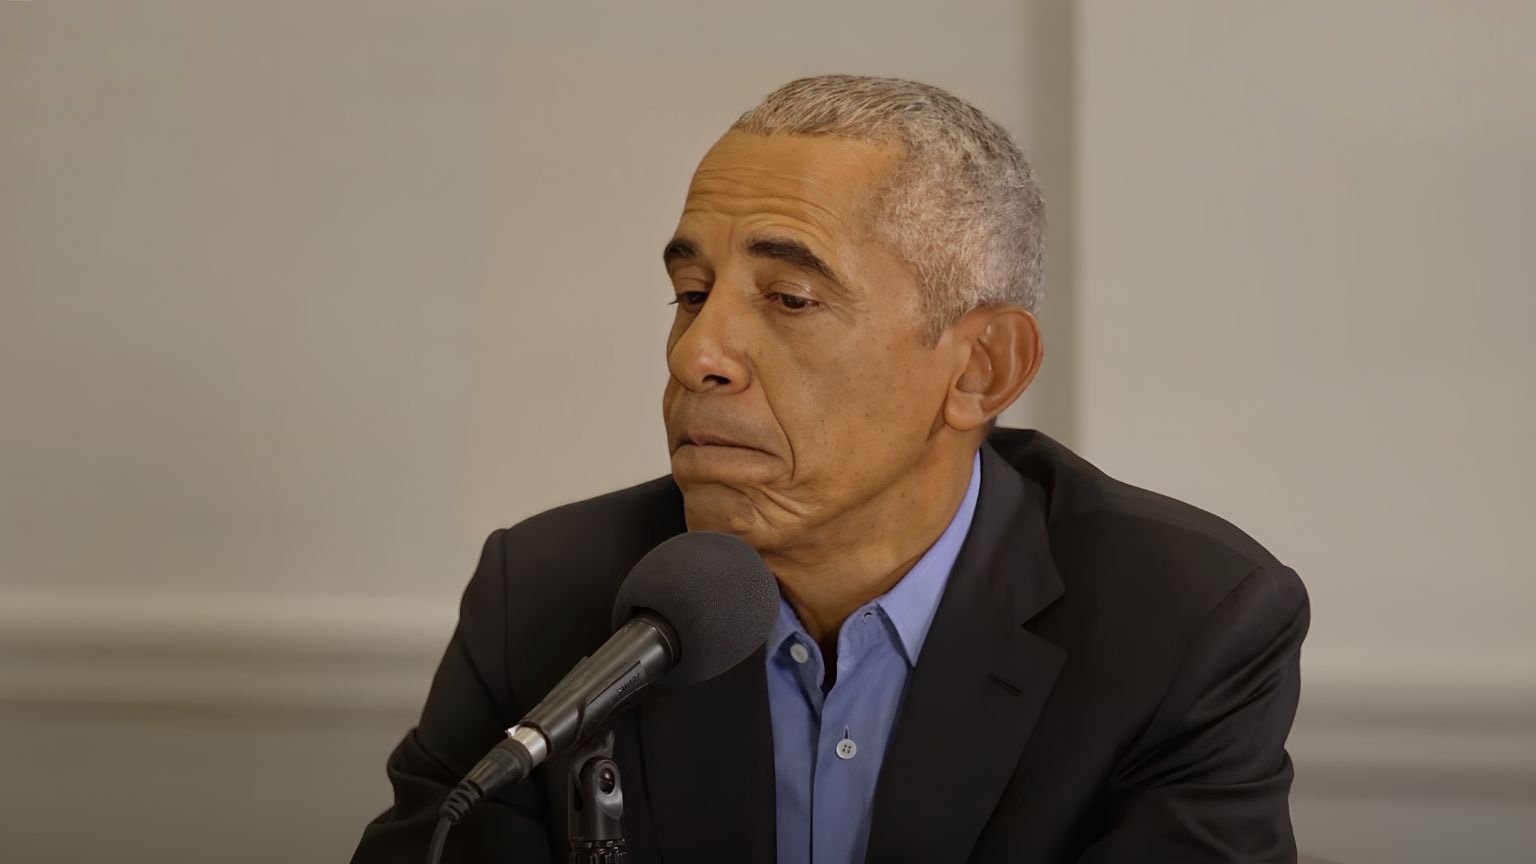 Obama: “people just want to not feel as if they are walking on eggshells”